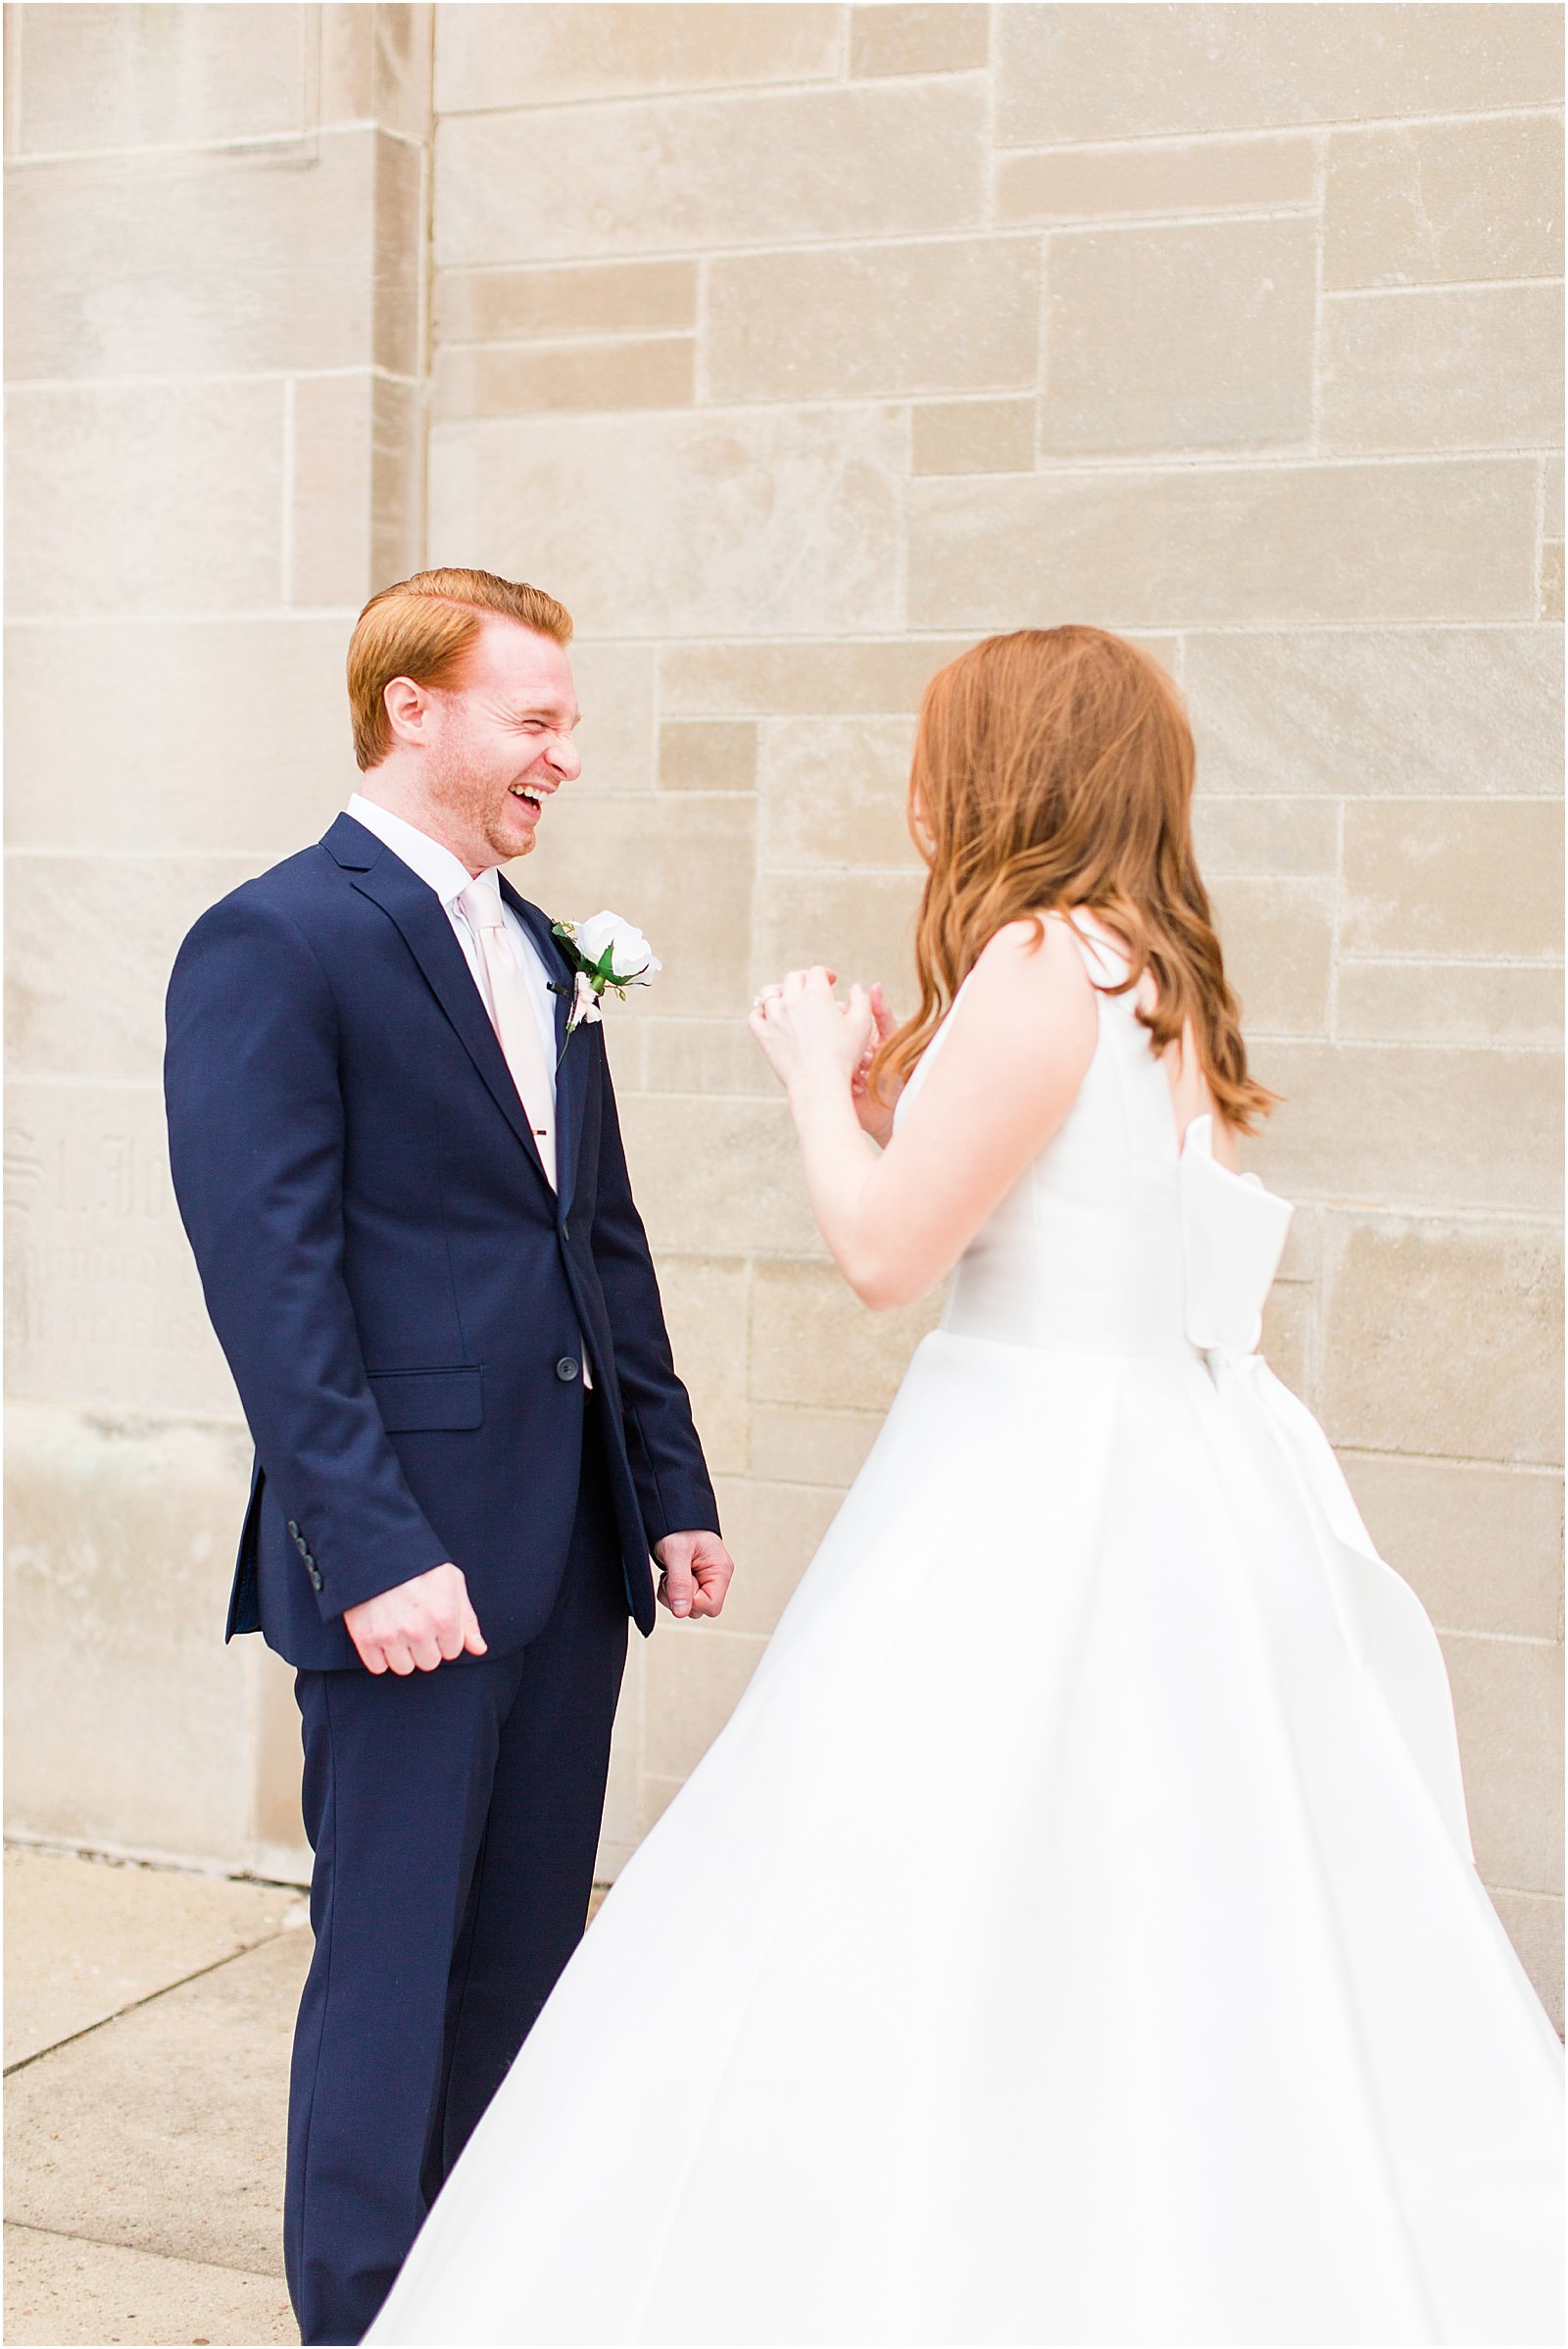 A Perfectly Intimate Wedding in Downtown Evansville Indiana | Jennah and Steve | Bret and Brandie Photography | | 0049.jpg